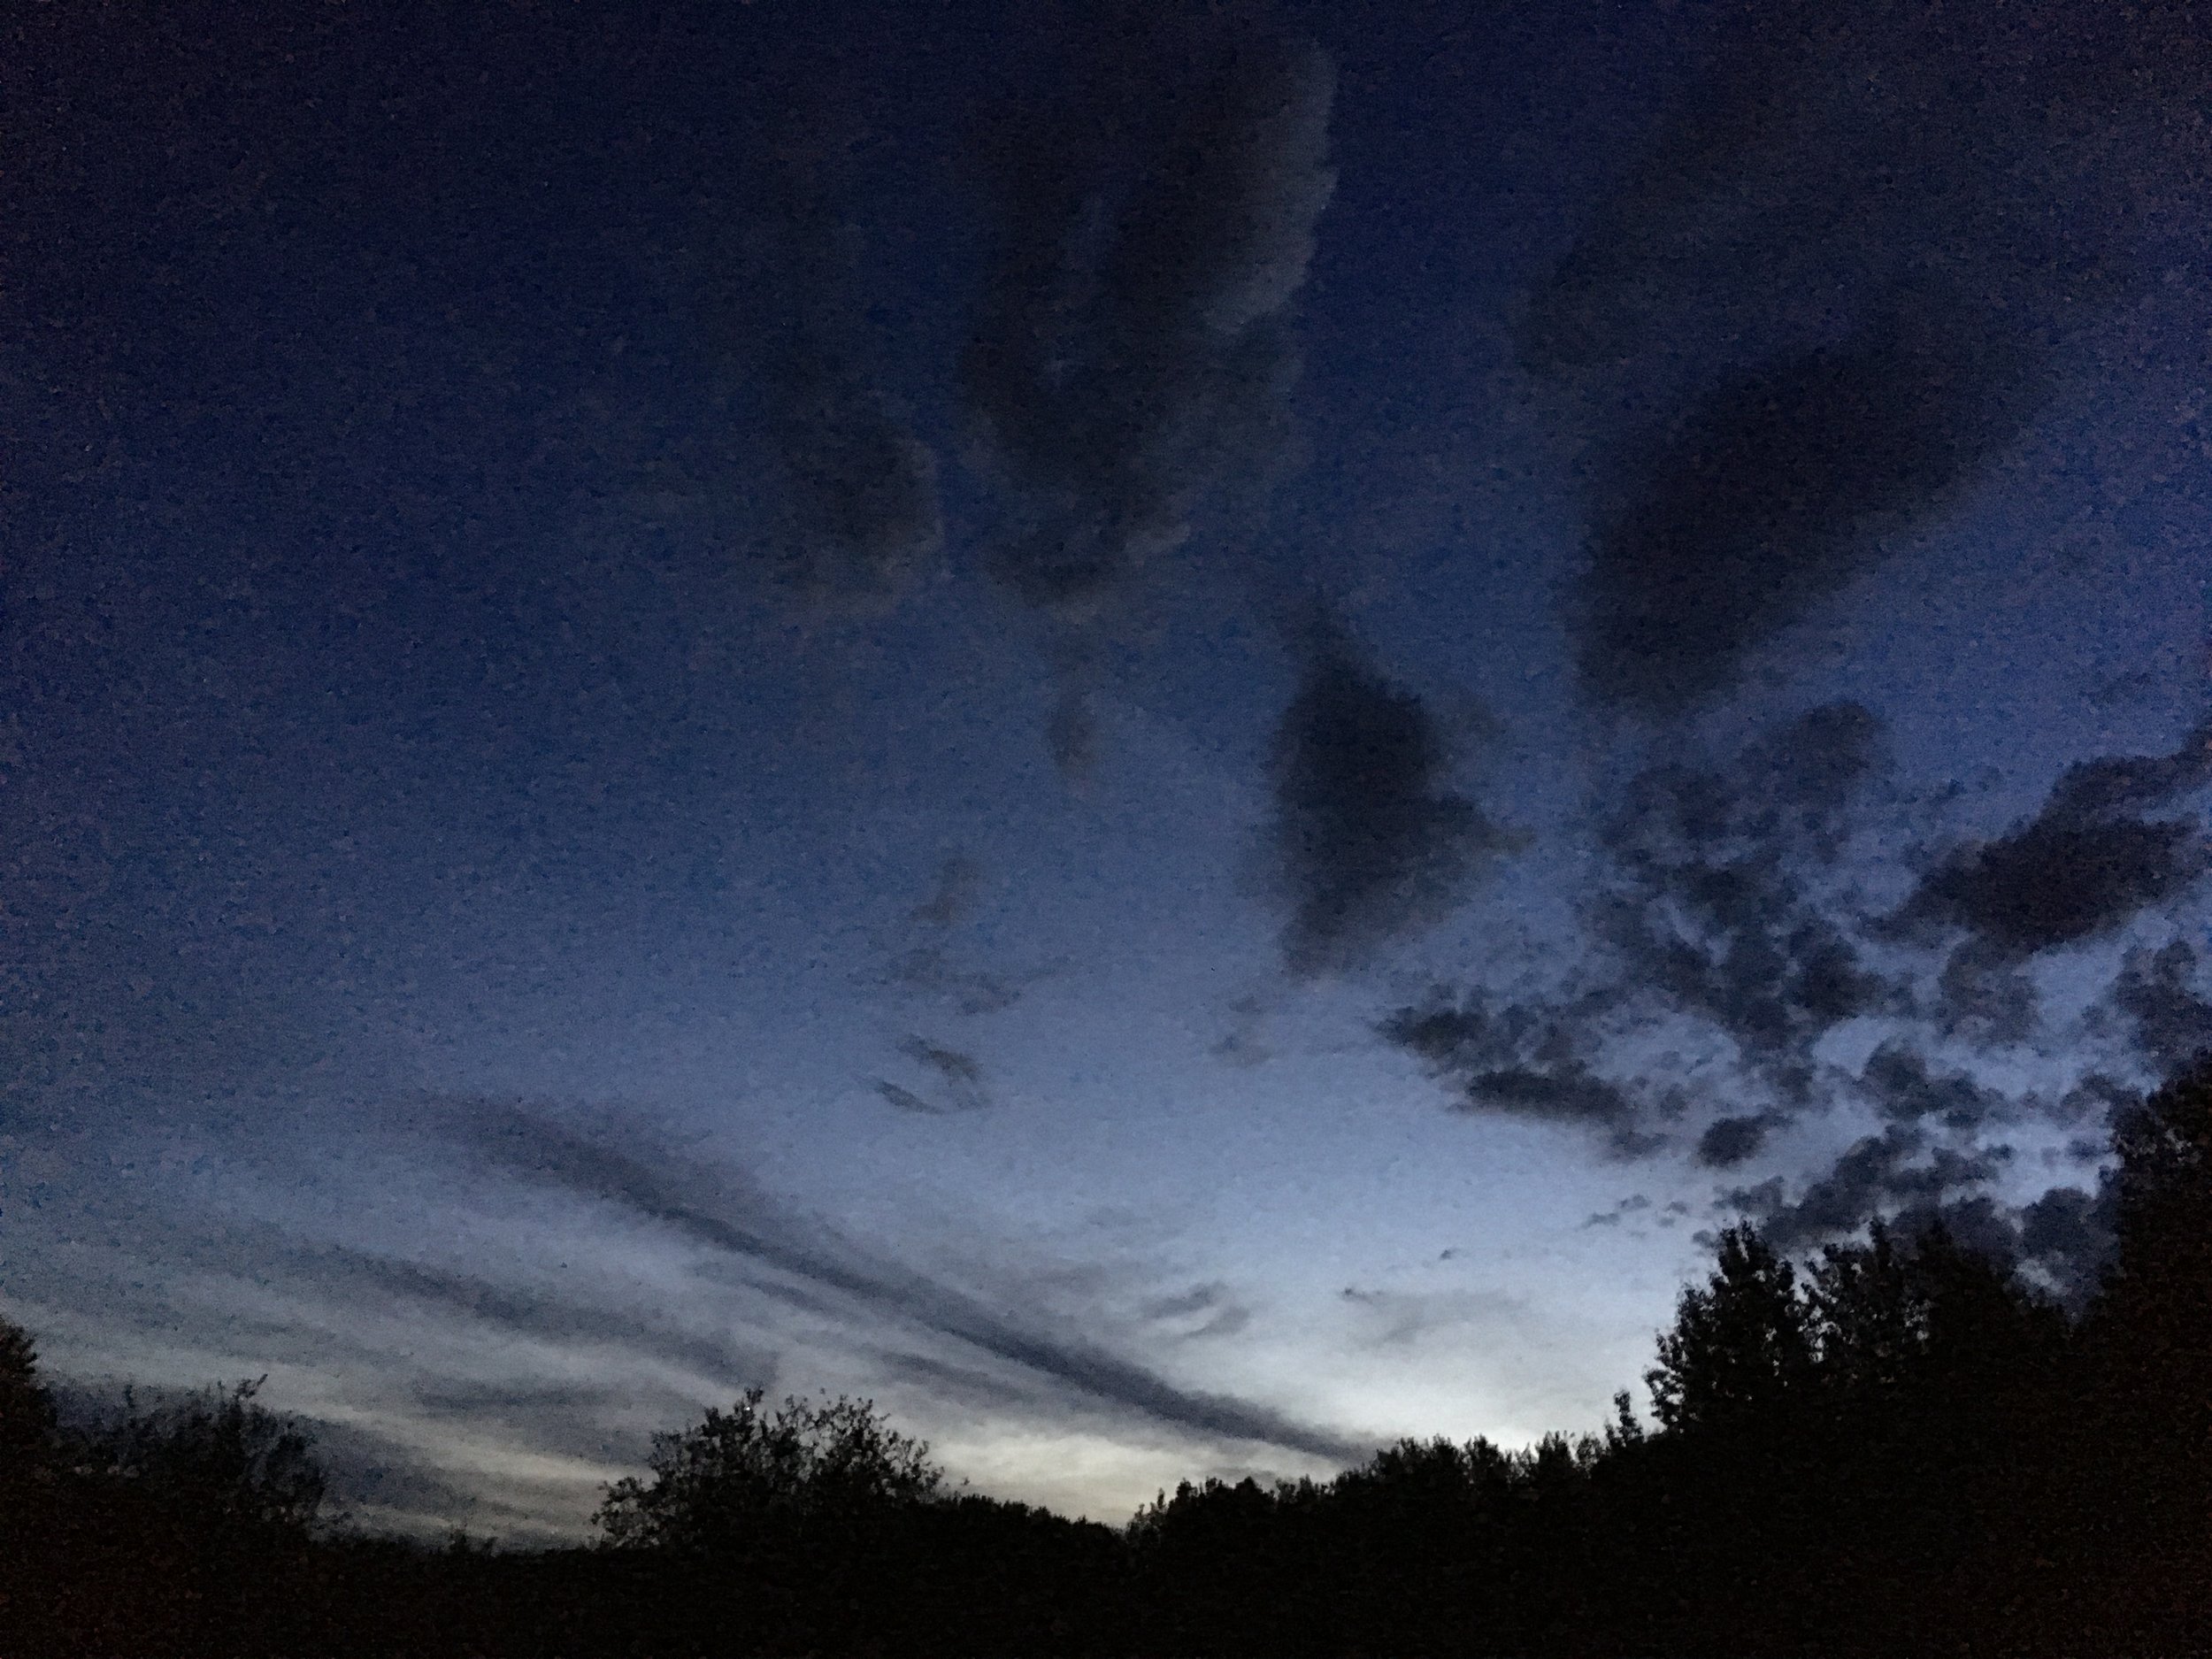 The night sky at the Glory Hills Bat and Owl survey